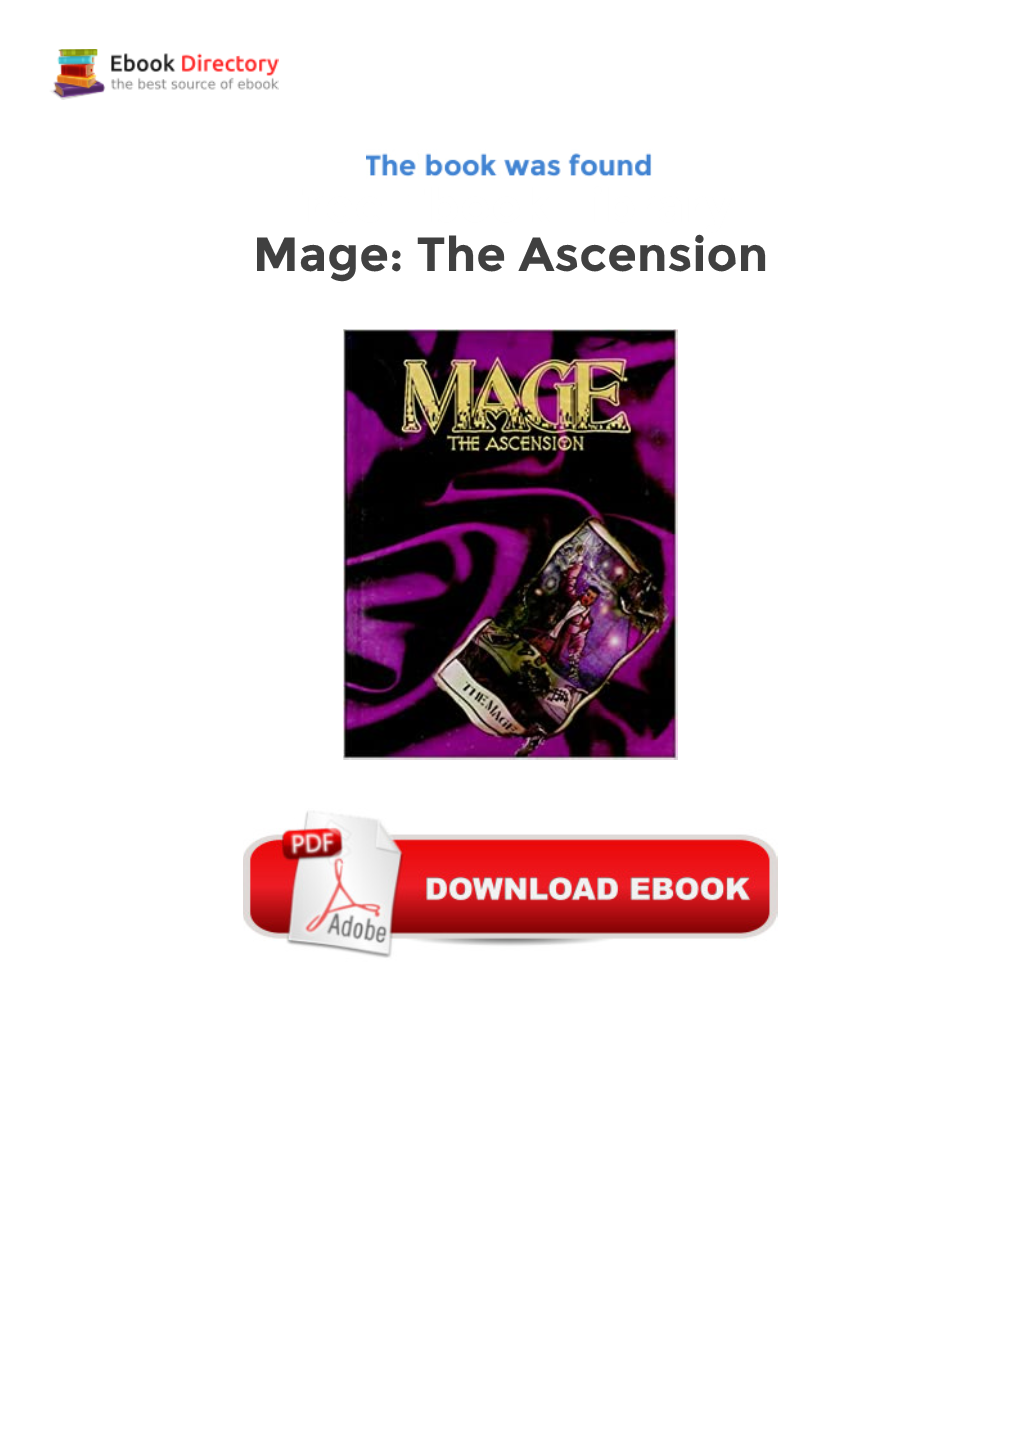 Free Ebook Library Mage: the Ascension Book by Brooks, Dierd're, Chambers, John, Woodcock, Lindsay